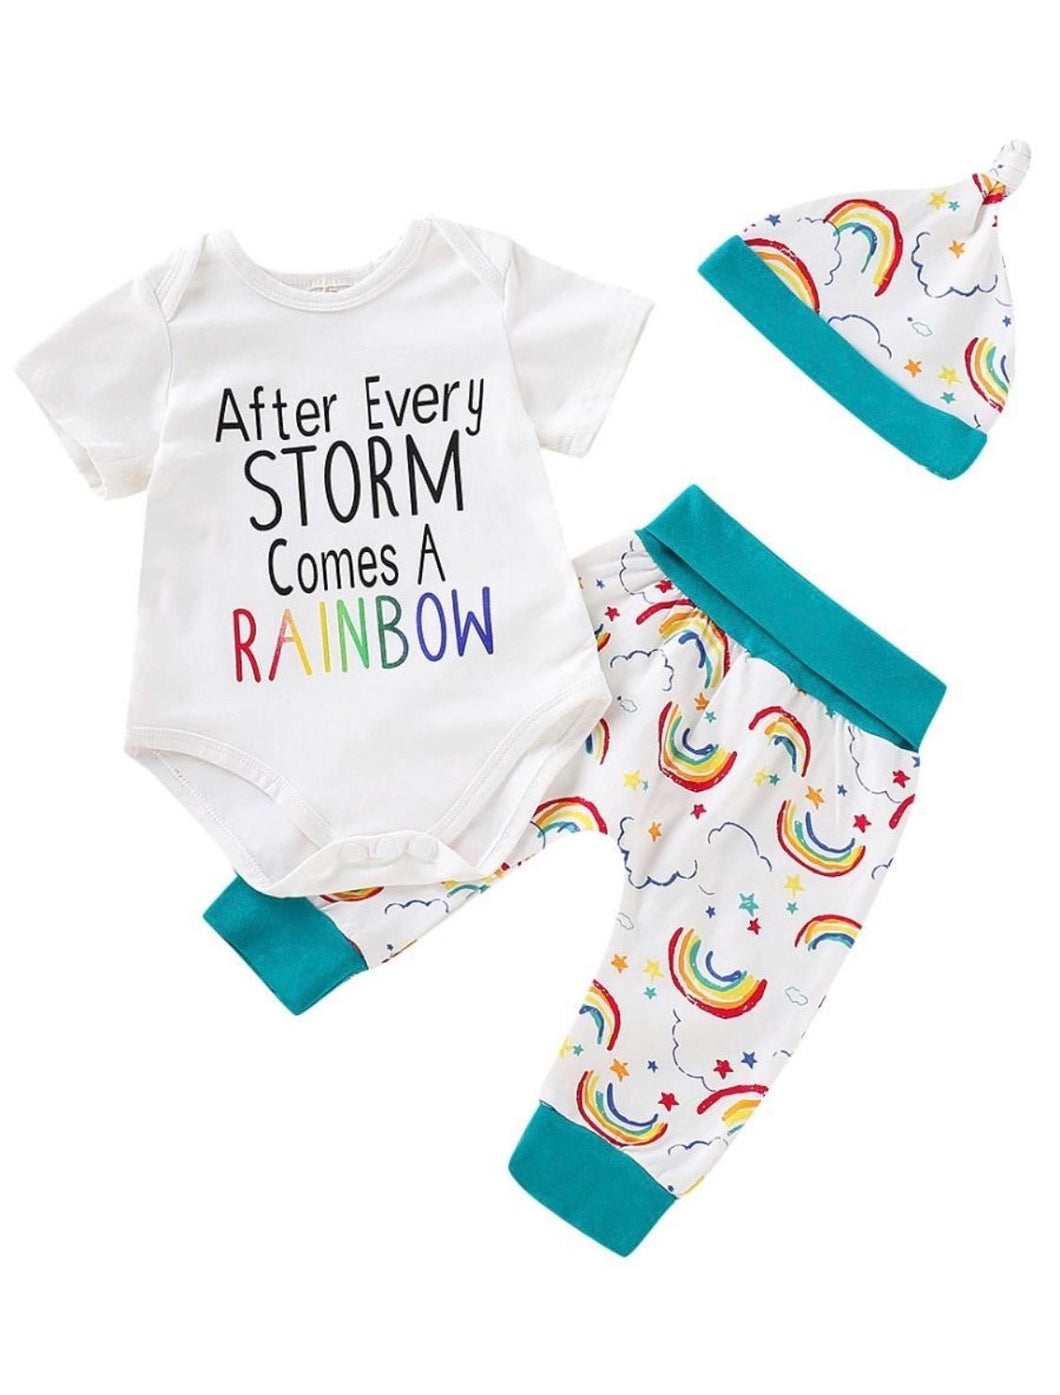 “After every storm comes a rainbow” set - size 6 months